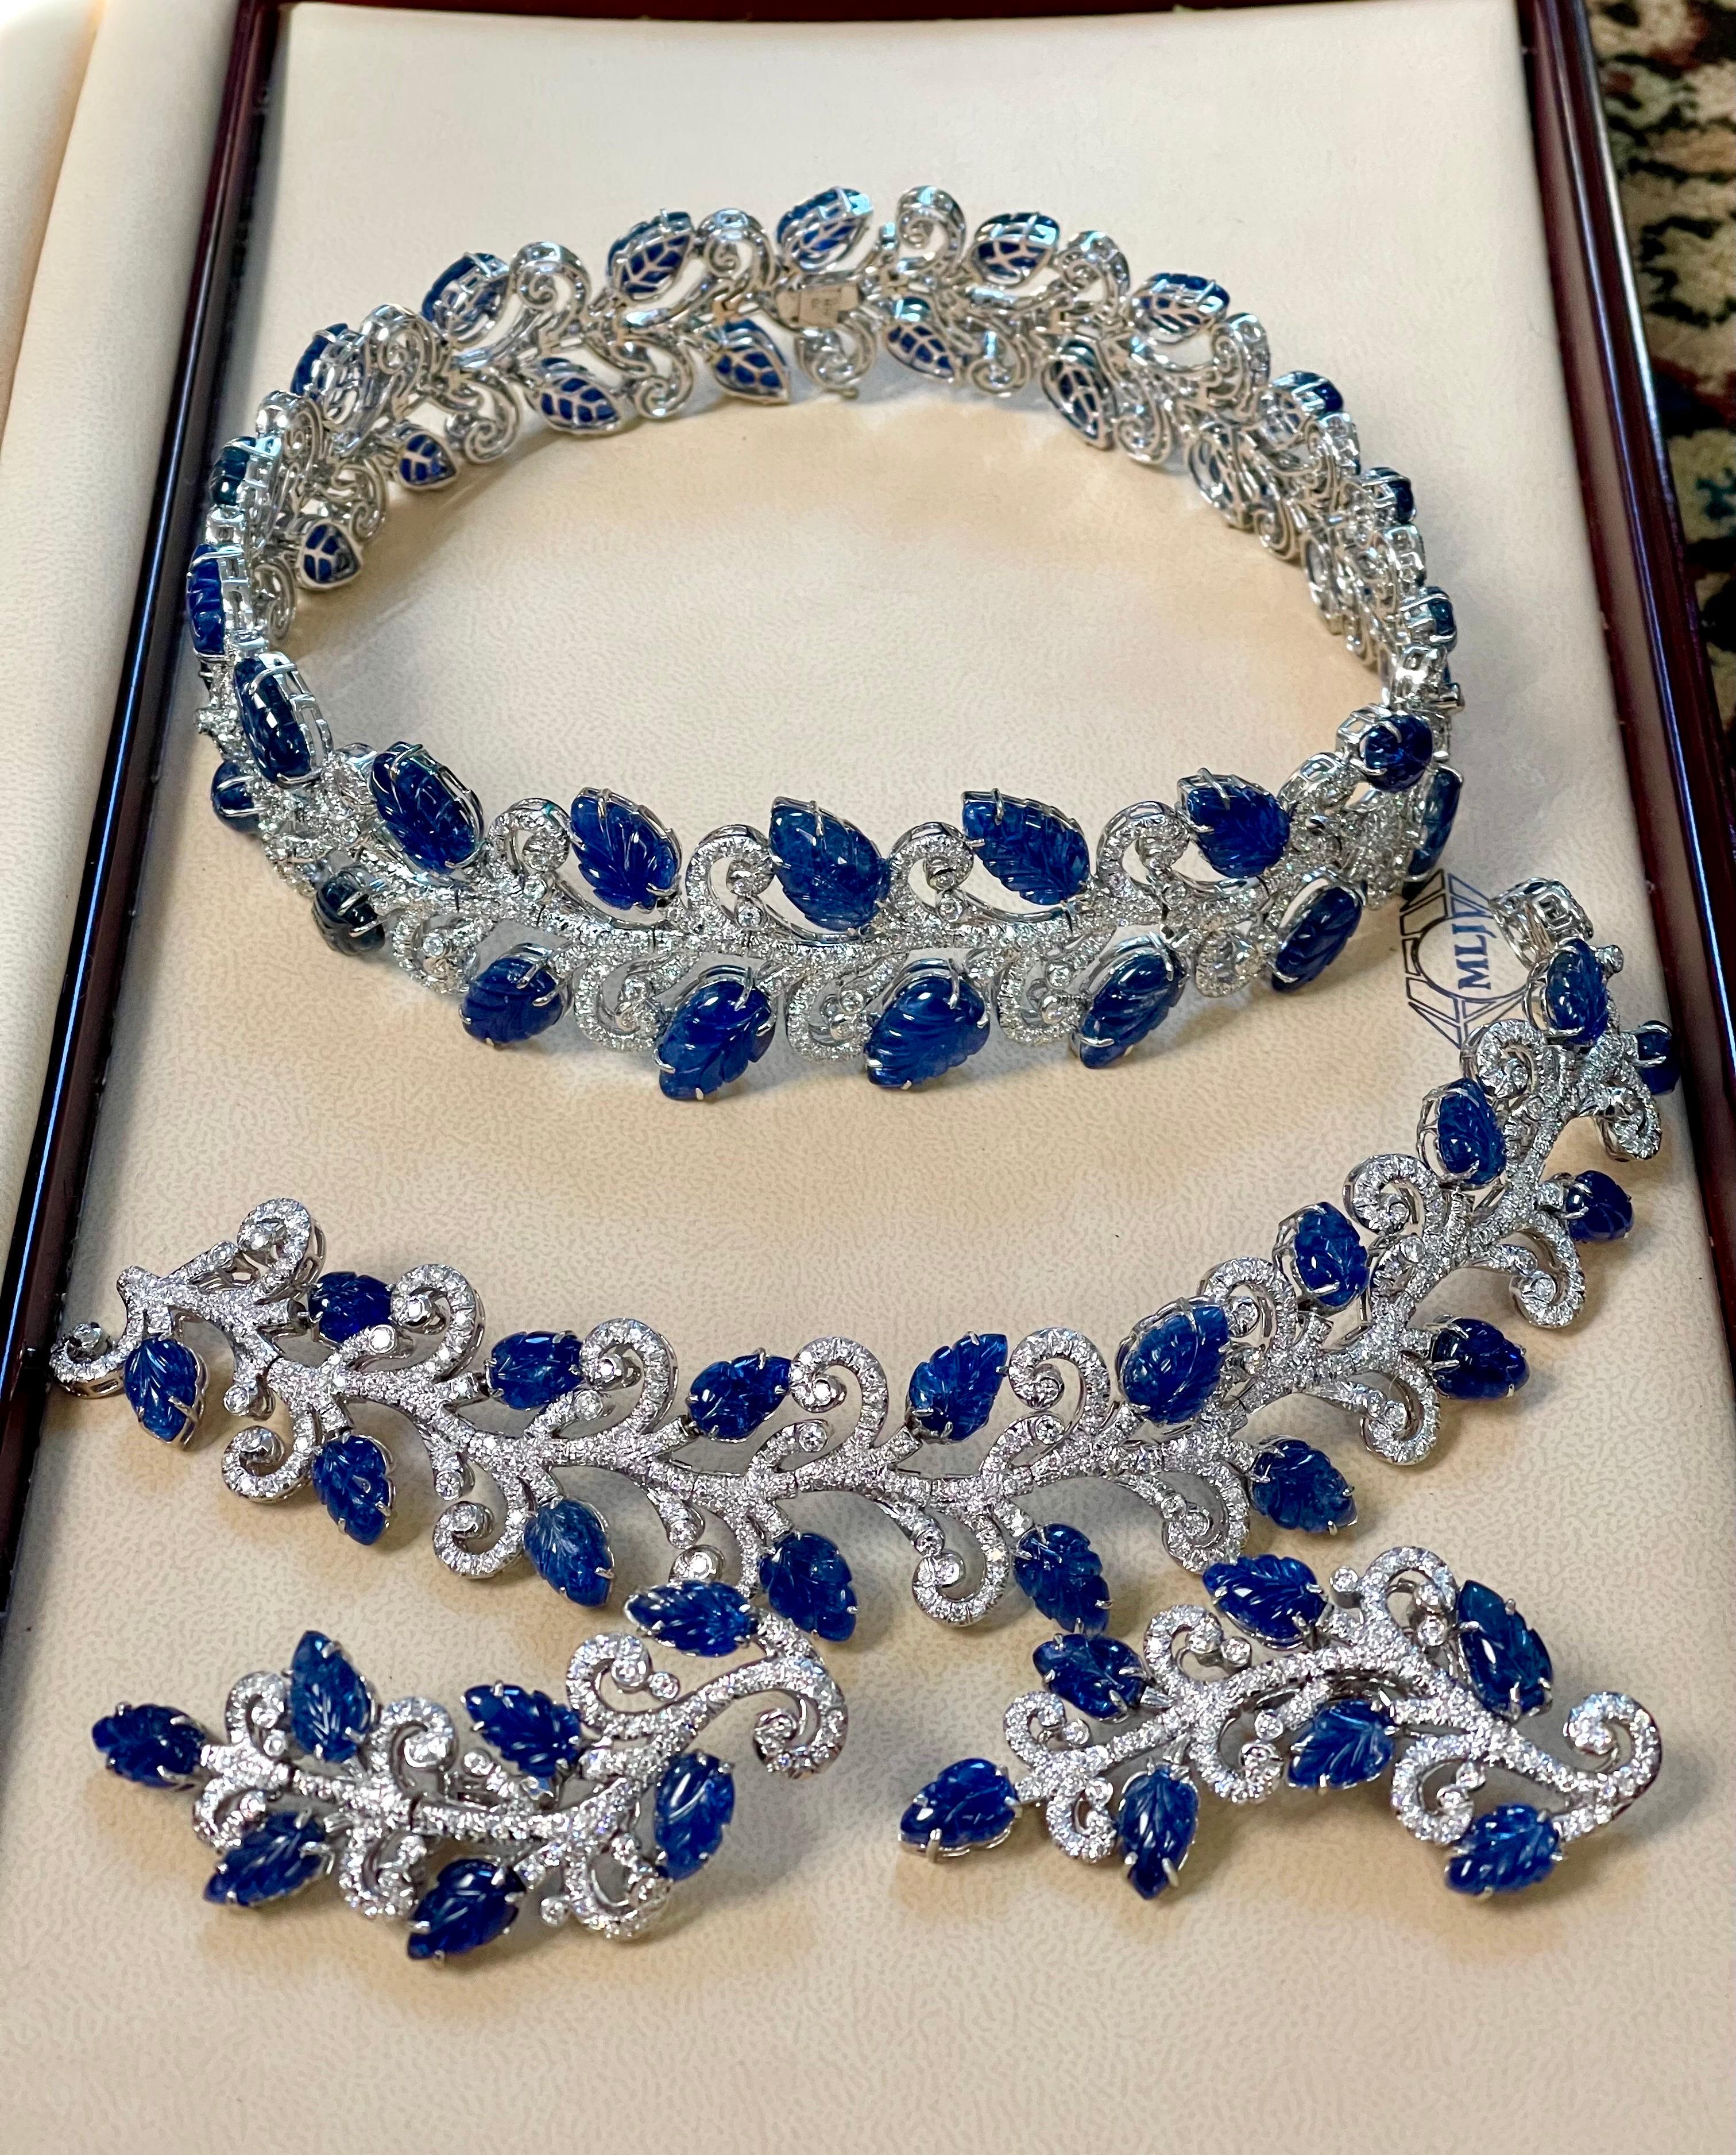 330 Ct Natural Carved Blue Sapphire & 65 Ct Diamond Necklace Bracelet & Earring For Sale 8